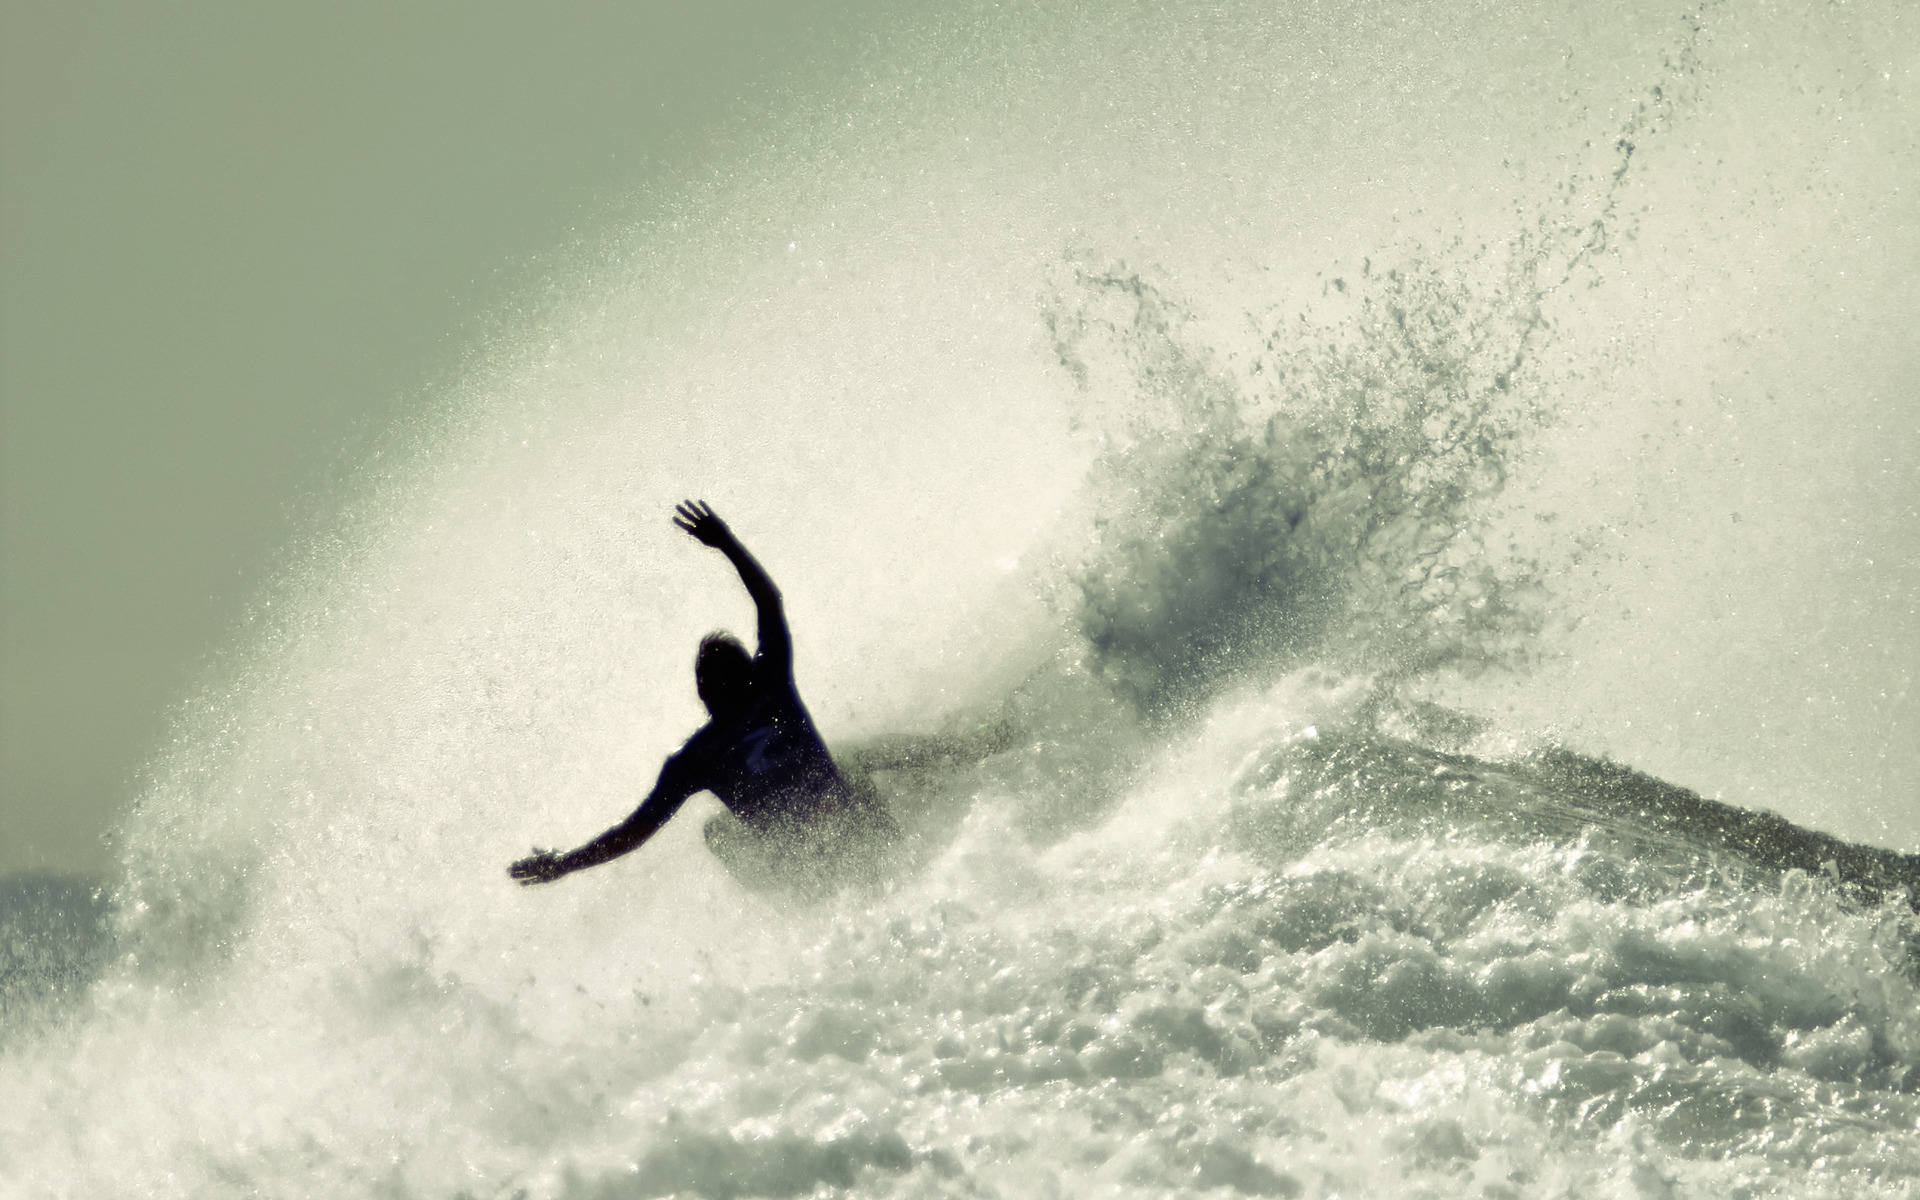 Surfer conquering massive waves, combining athleticism and nature's power.